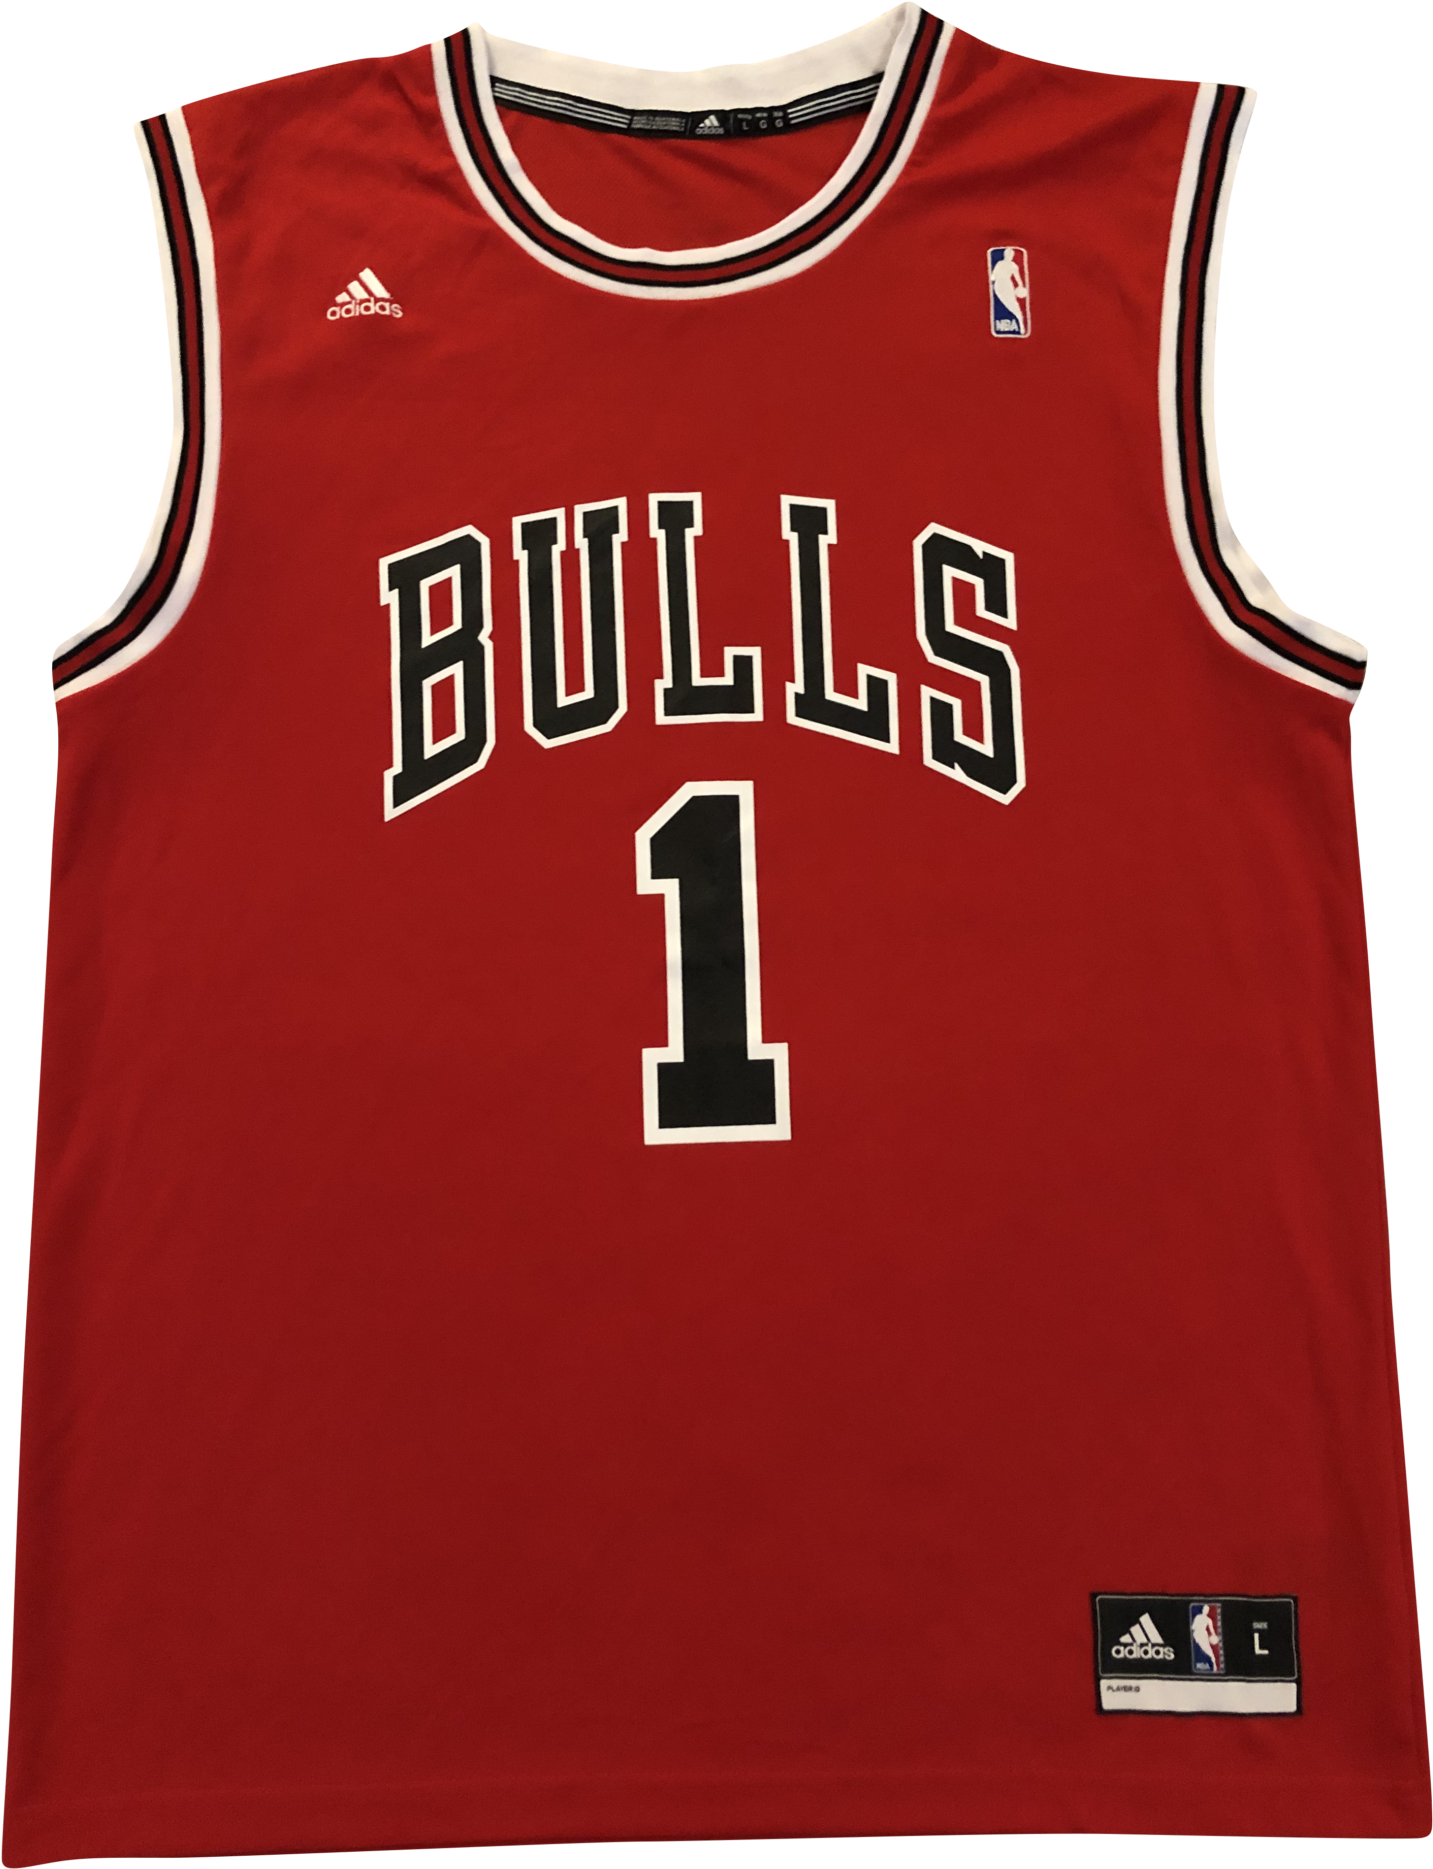 A Red Basketball Jersey With Black Text